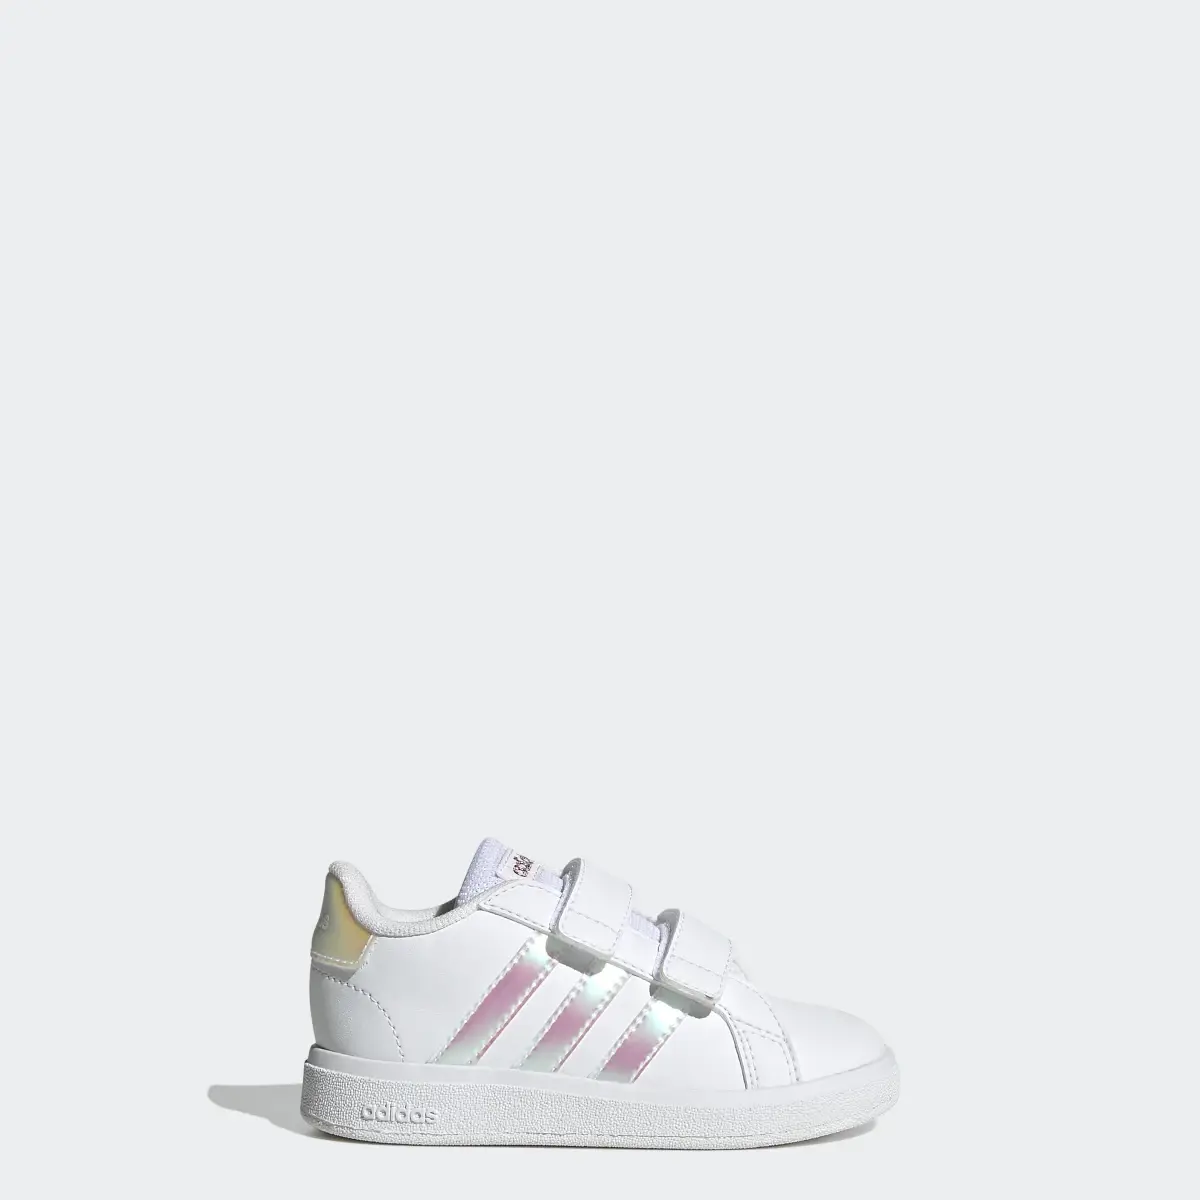 Adidas Grand Court Lifestyle Court Hook and Loop Shoes. 1